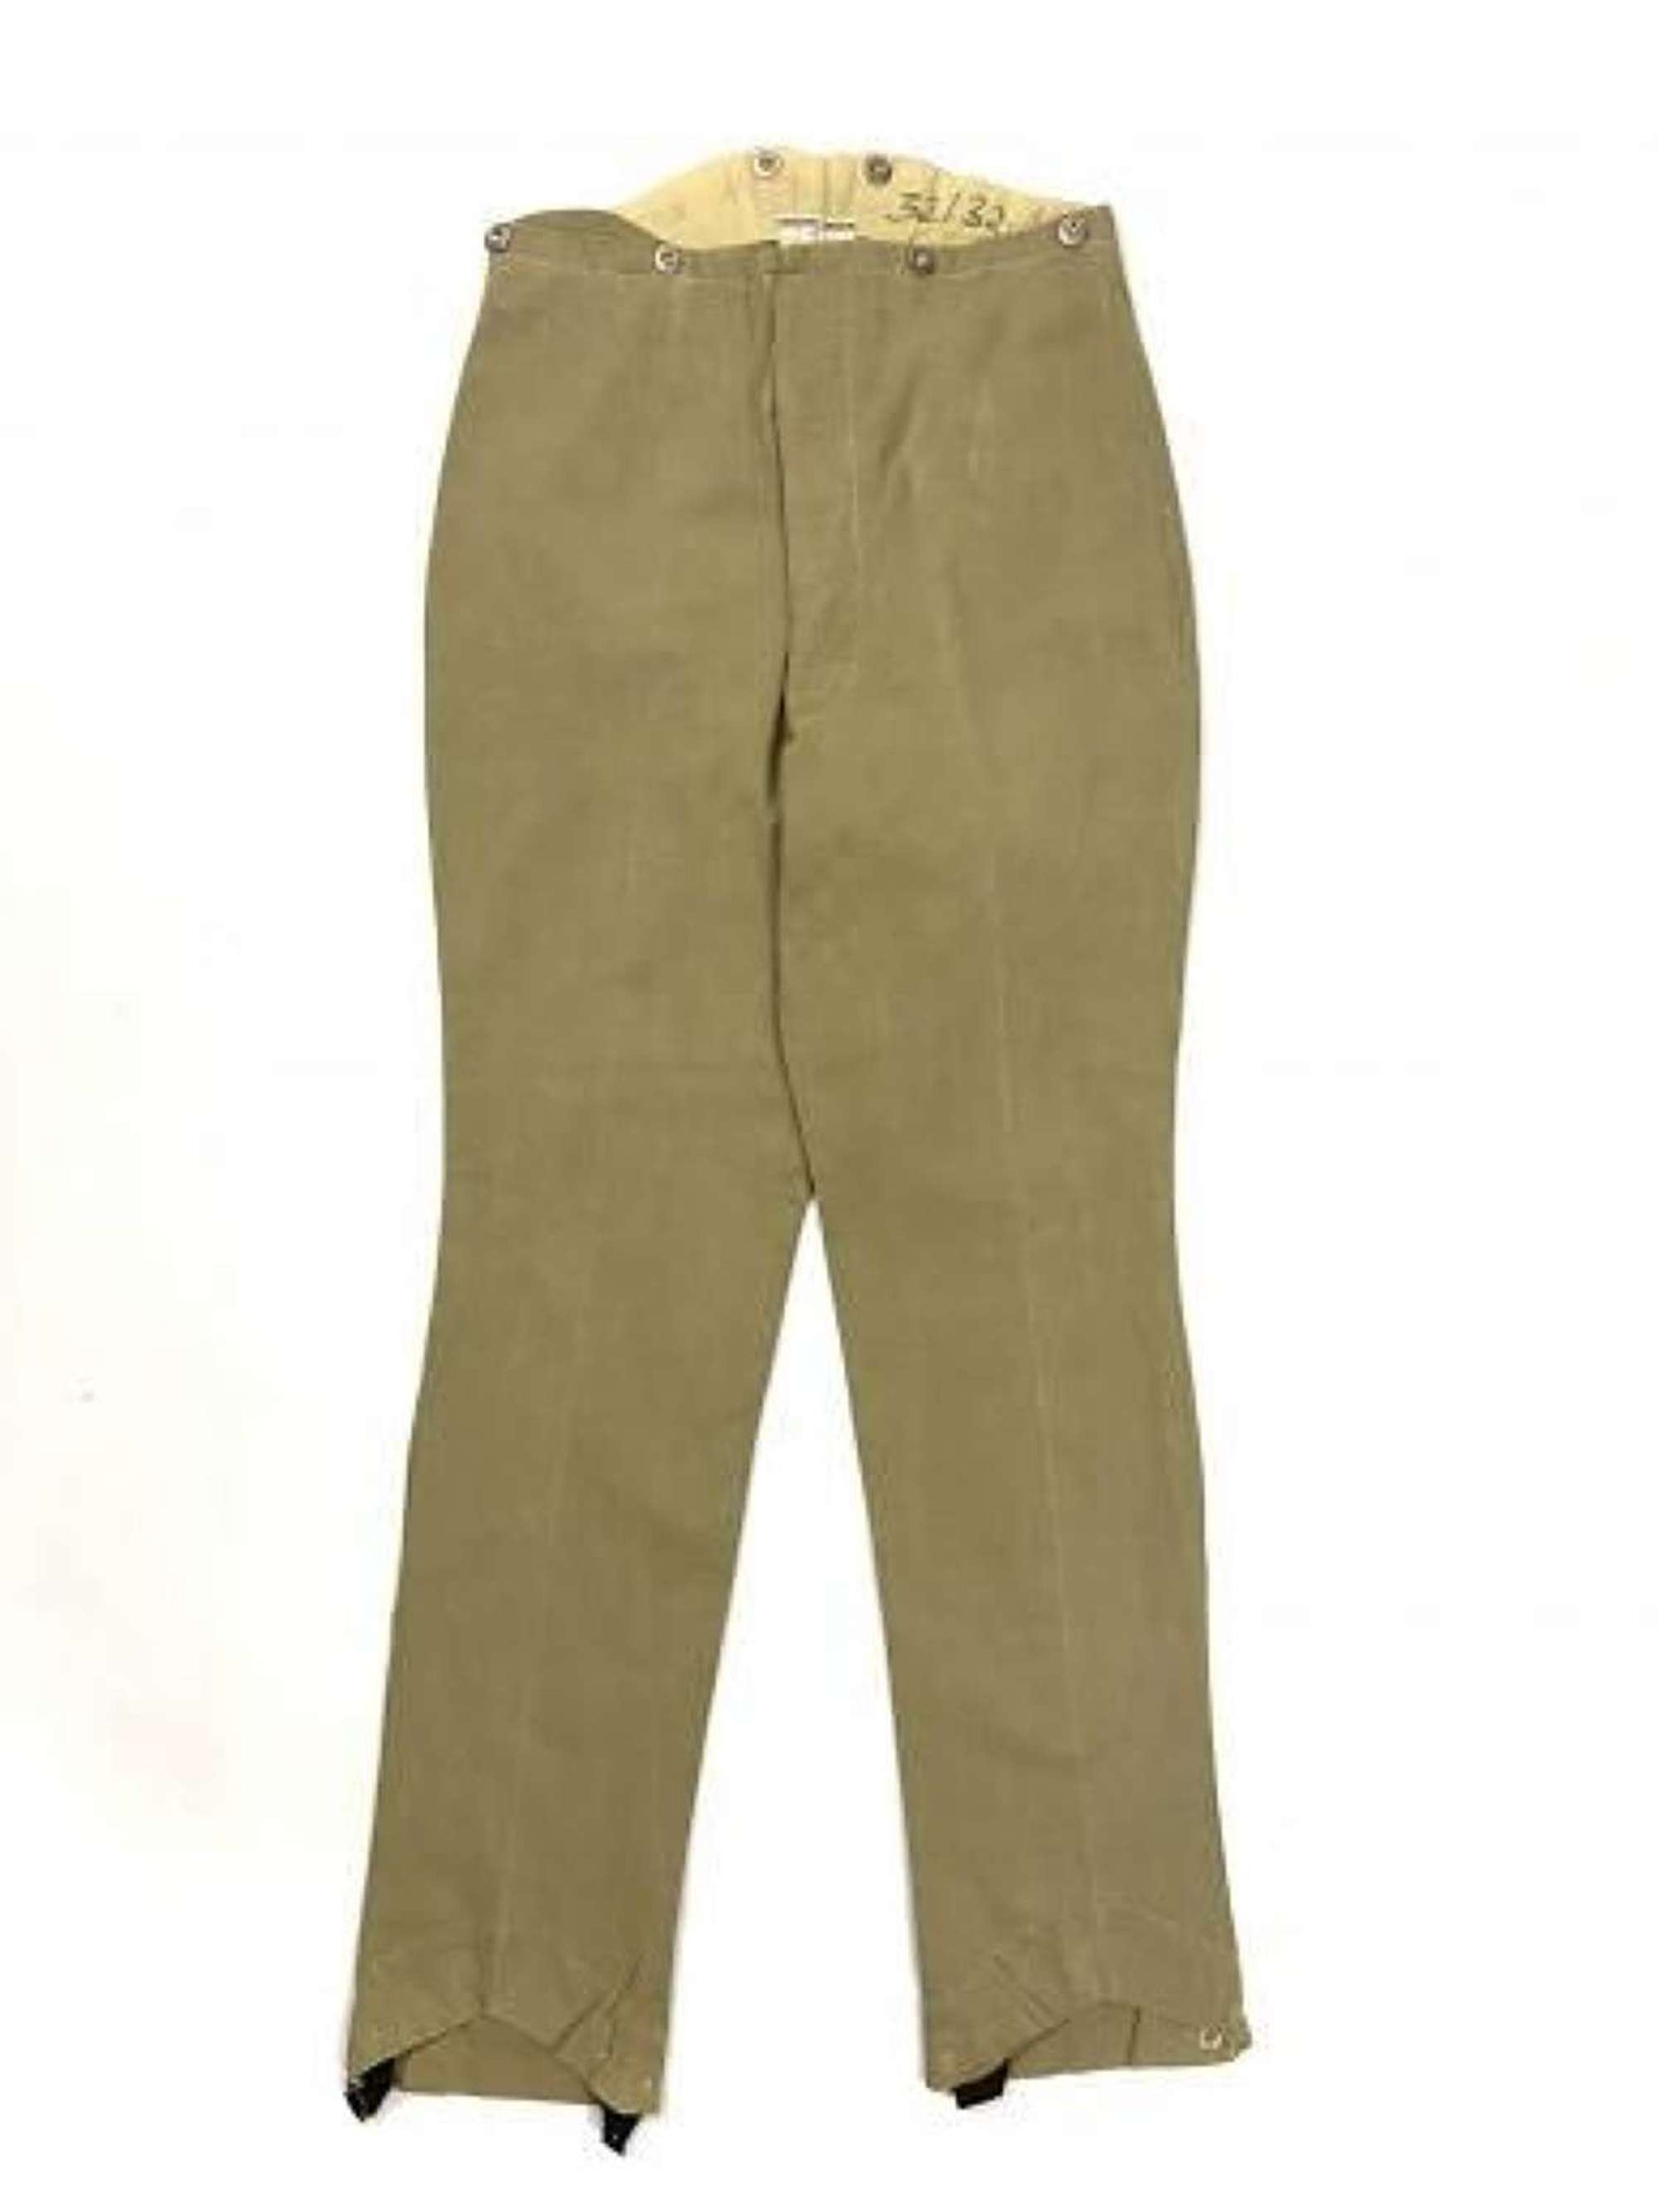 Original Great War Officers Khaki Drill Trousers by 'Hawkes & Co'.